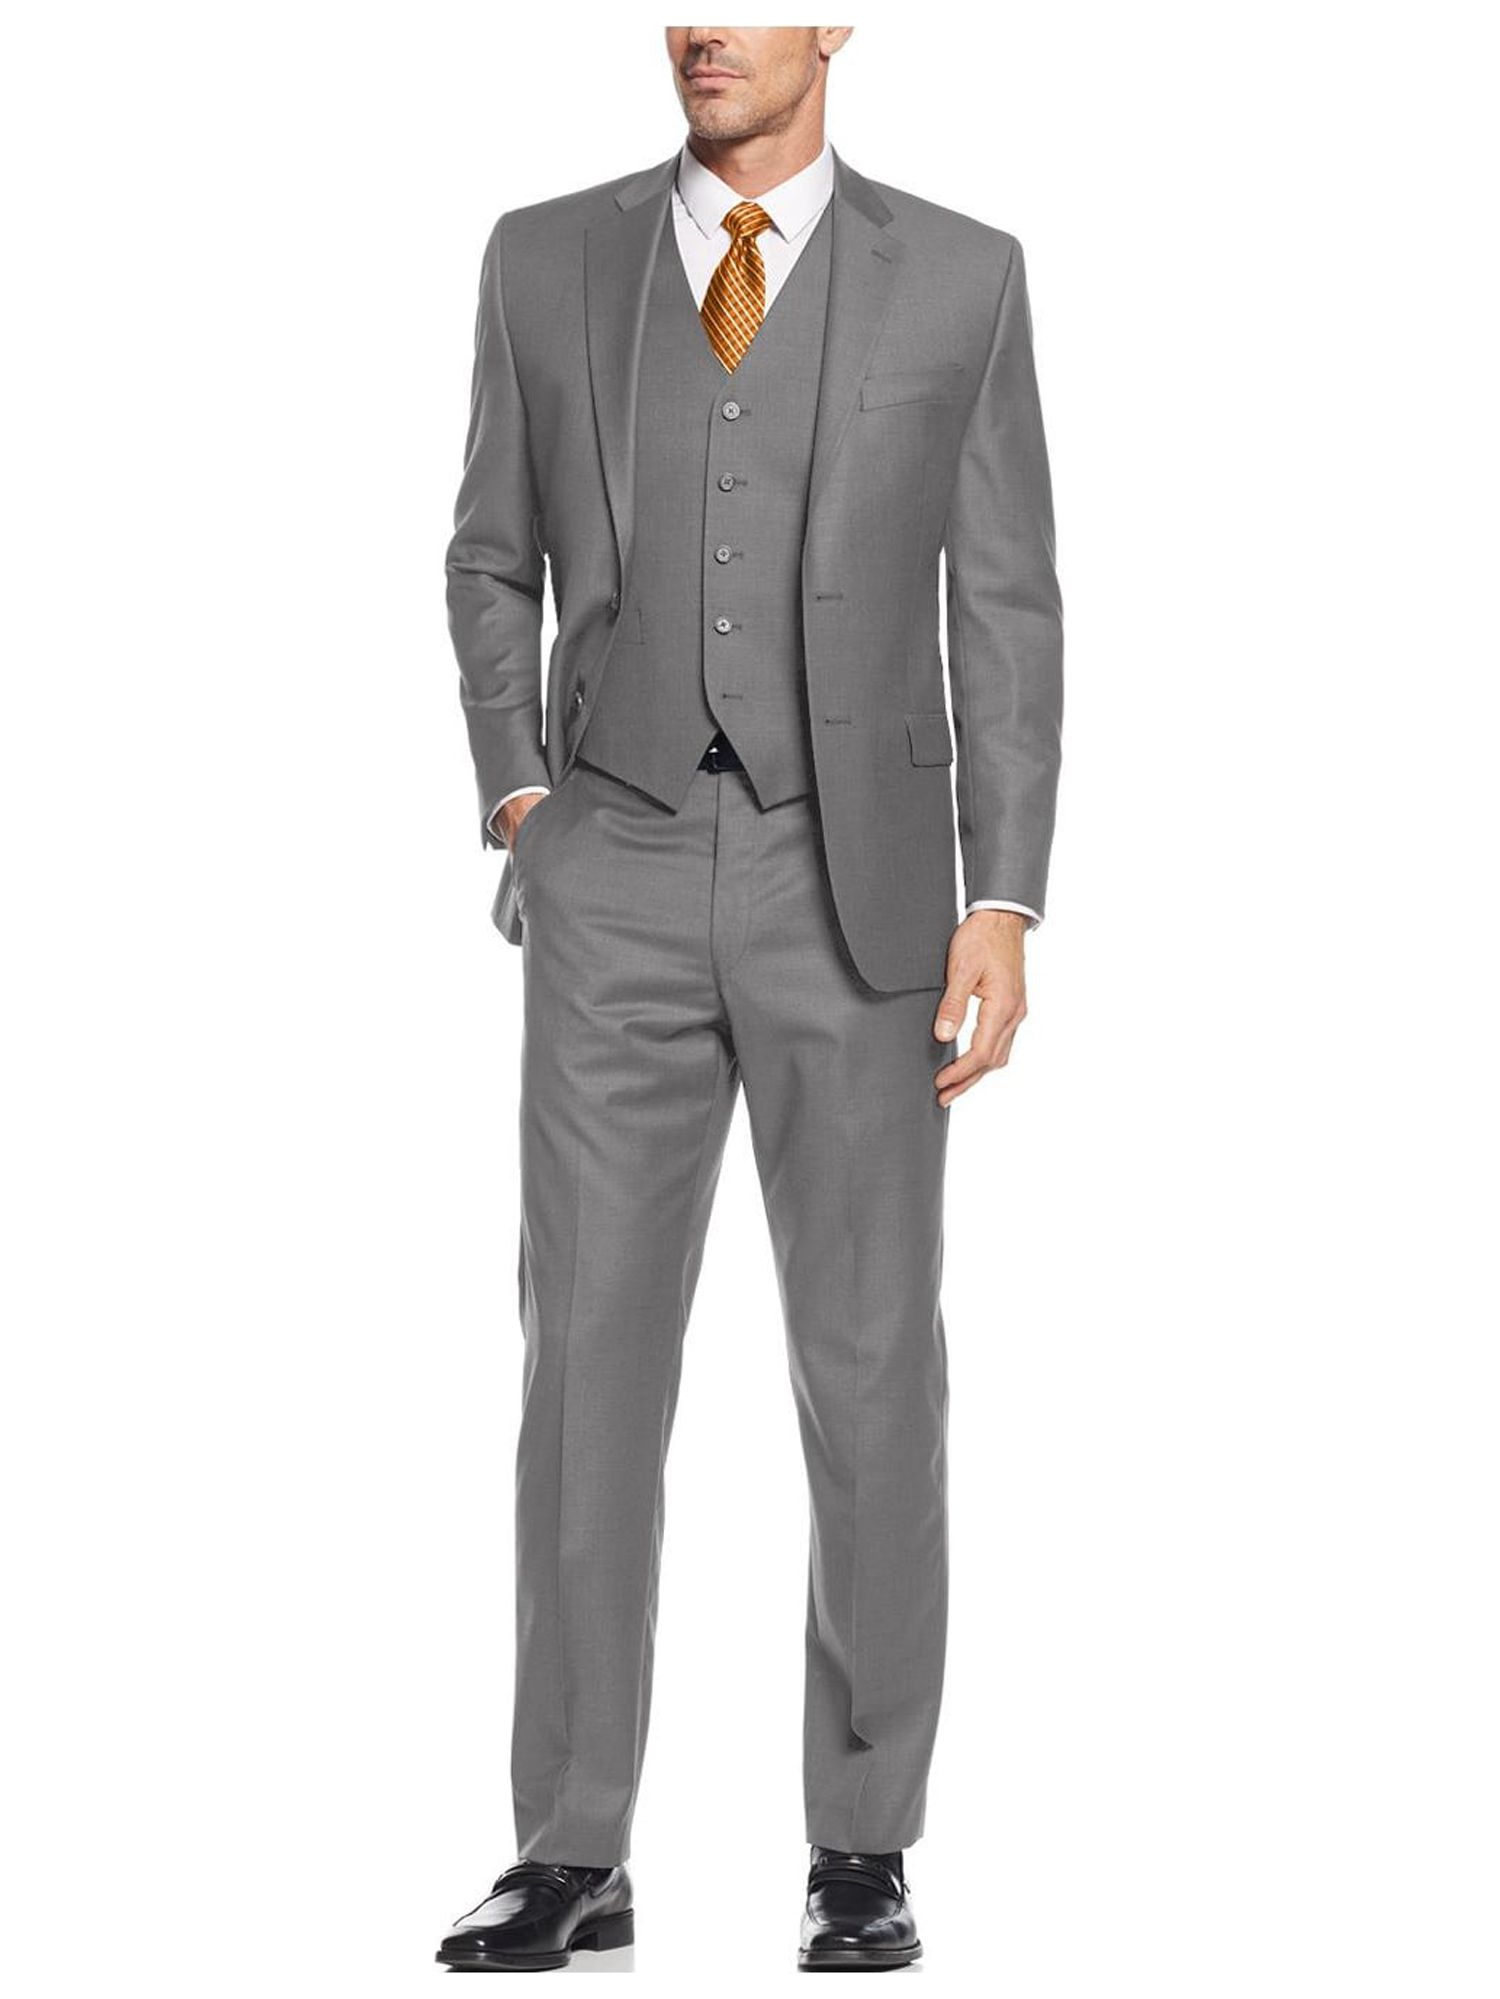 Mens Ticket Pocket Three Piece Gray Modern Fit Vested Suit - image 1 of 3